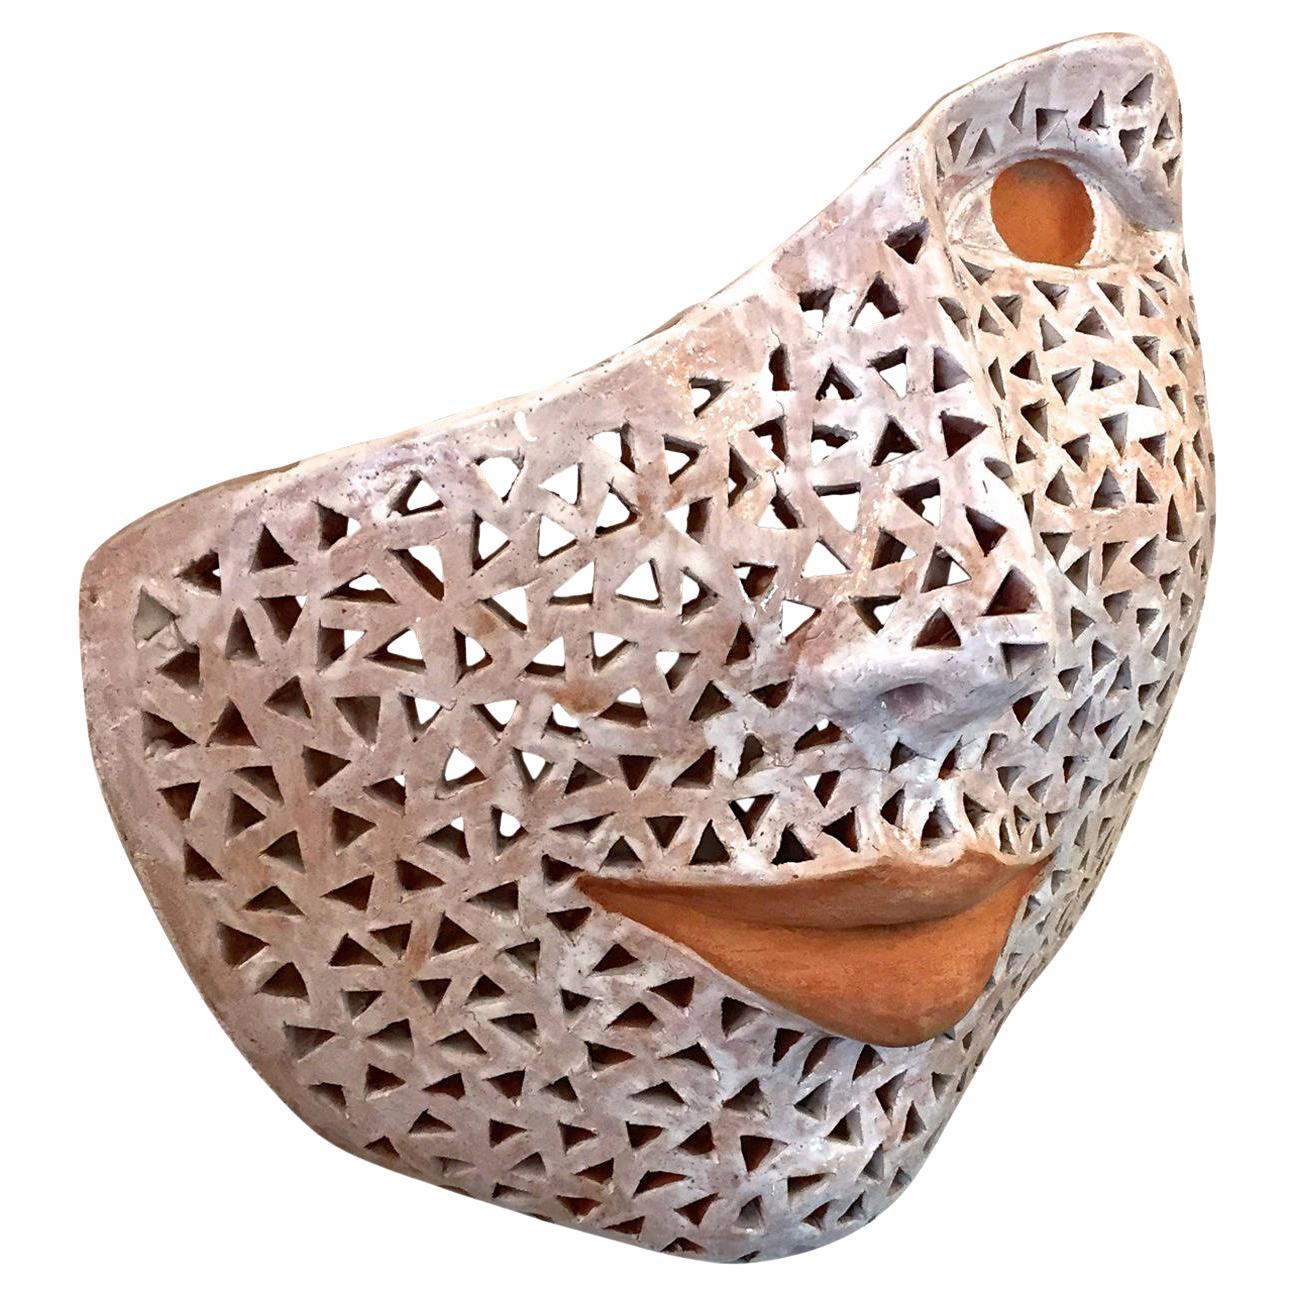 Italian Modern Perforated White Enameled Terracotta Wall Sculpture by Ginestroni For Sale